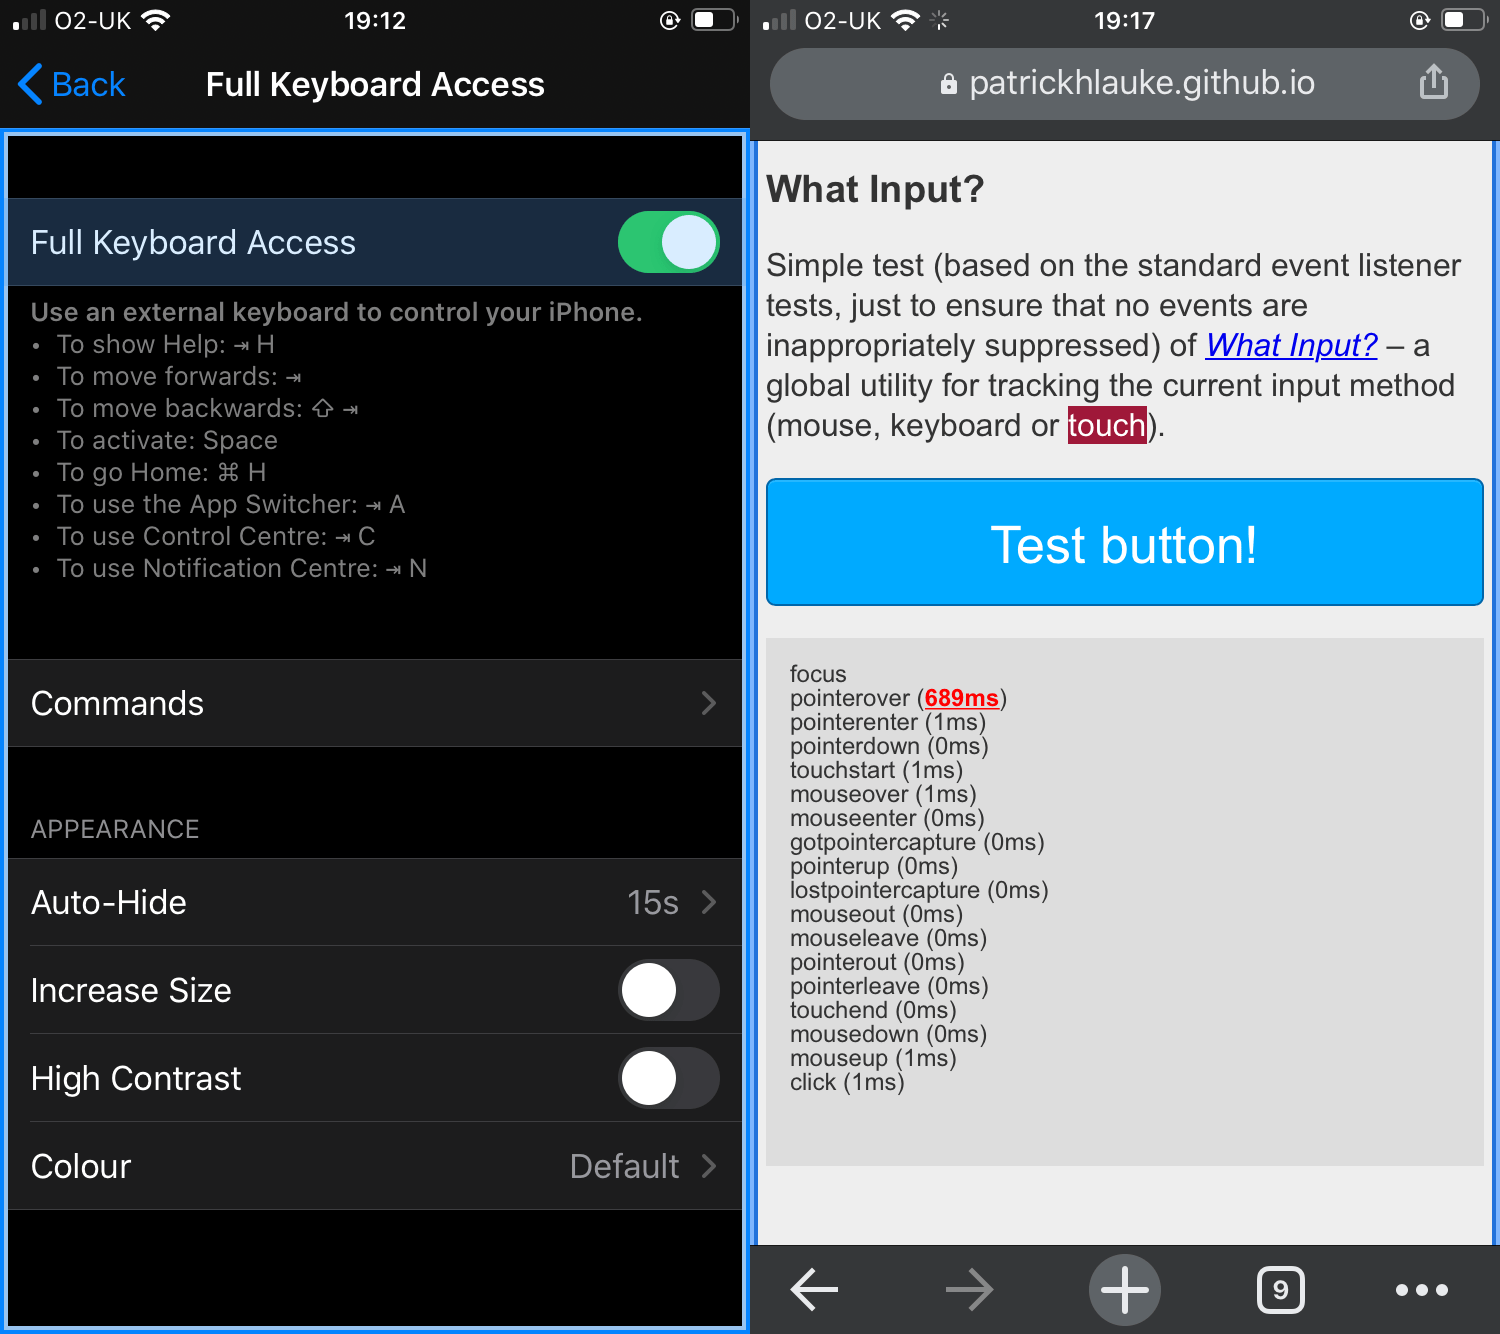 Showing iOS settings with Full Keyboard Access enabled on the left and an iPhone browser window open to the right with the What Input tool.